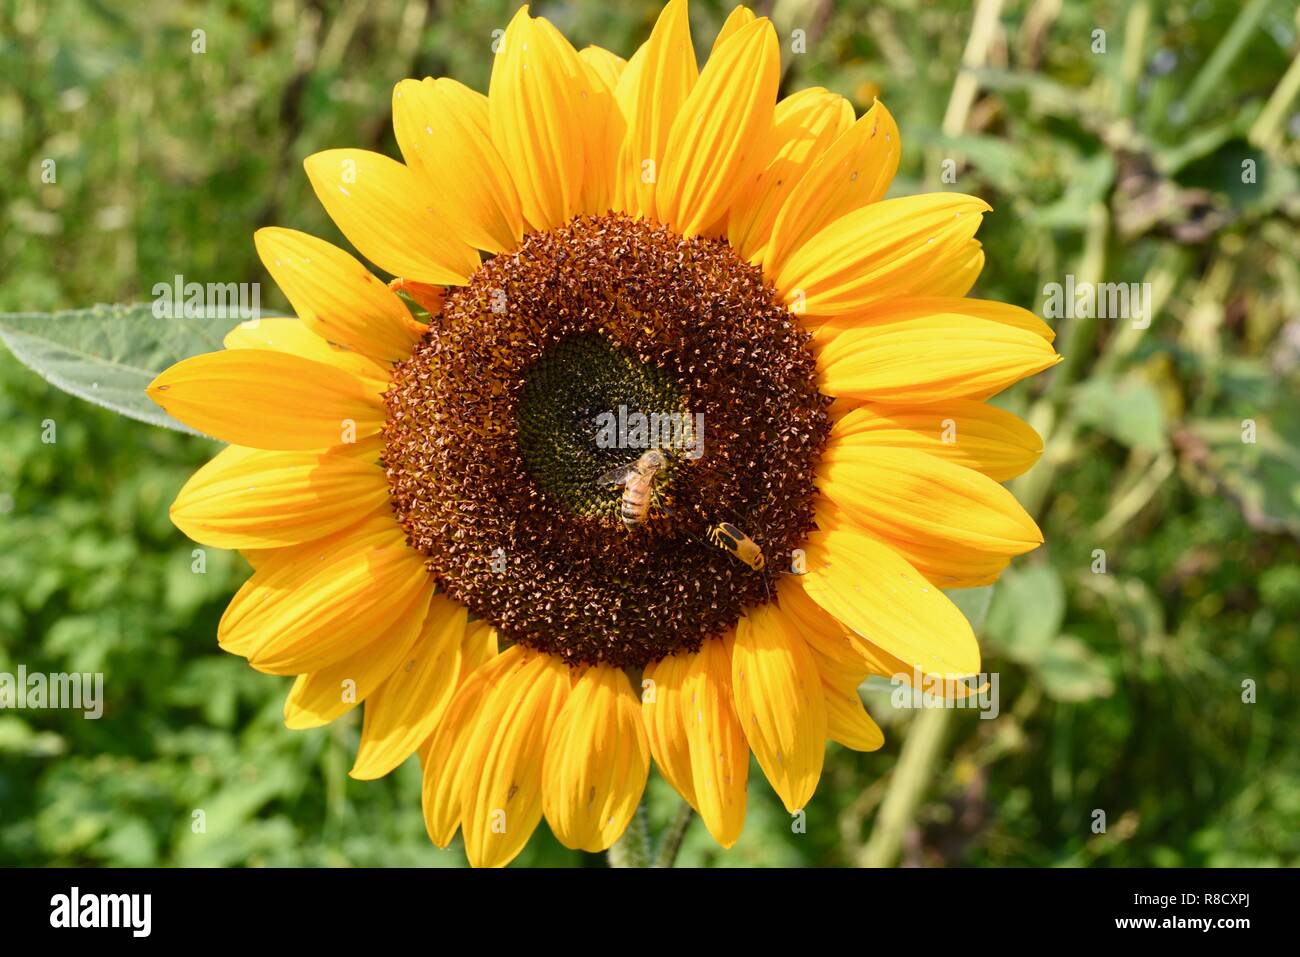 Bright yellow sunflower with honey bee collecting pollen in summer in a garden field, Wisconsin, USA. Stock Photo